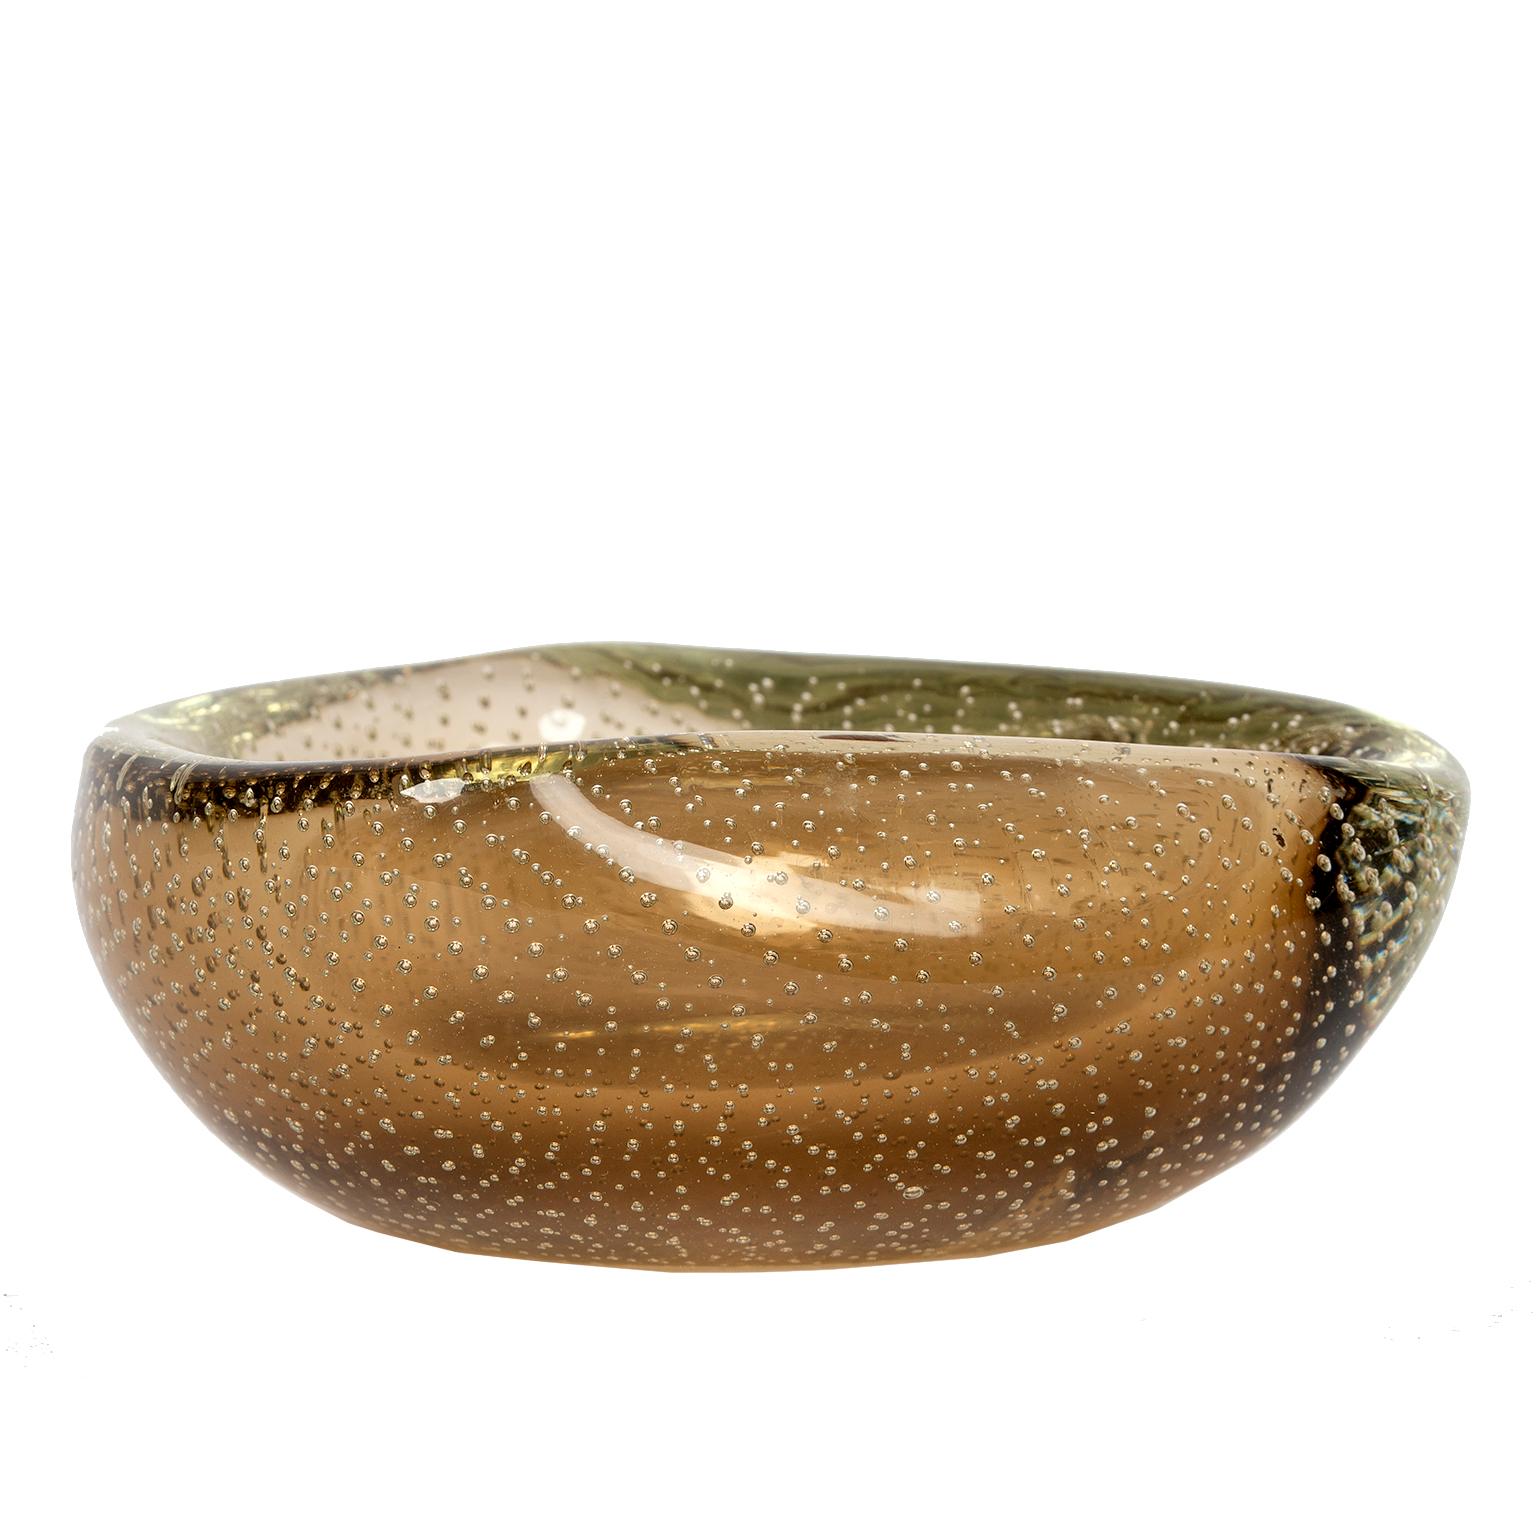 A sophisticated modernist Murano bowl with smoked amber tones and bubble inclusions.